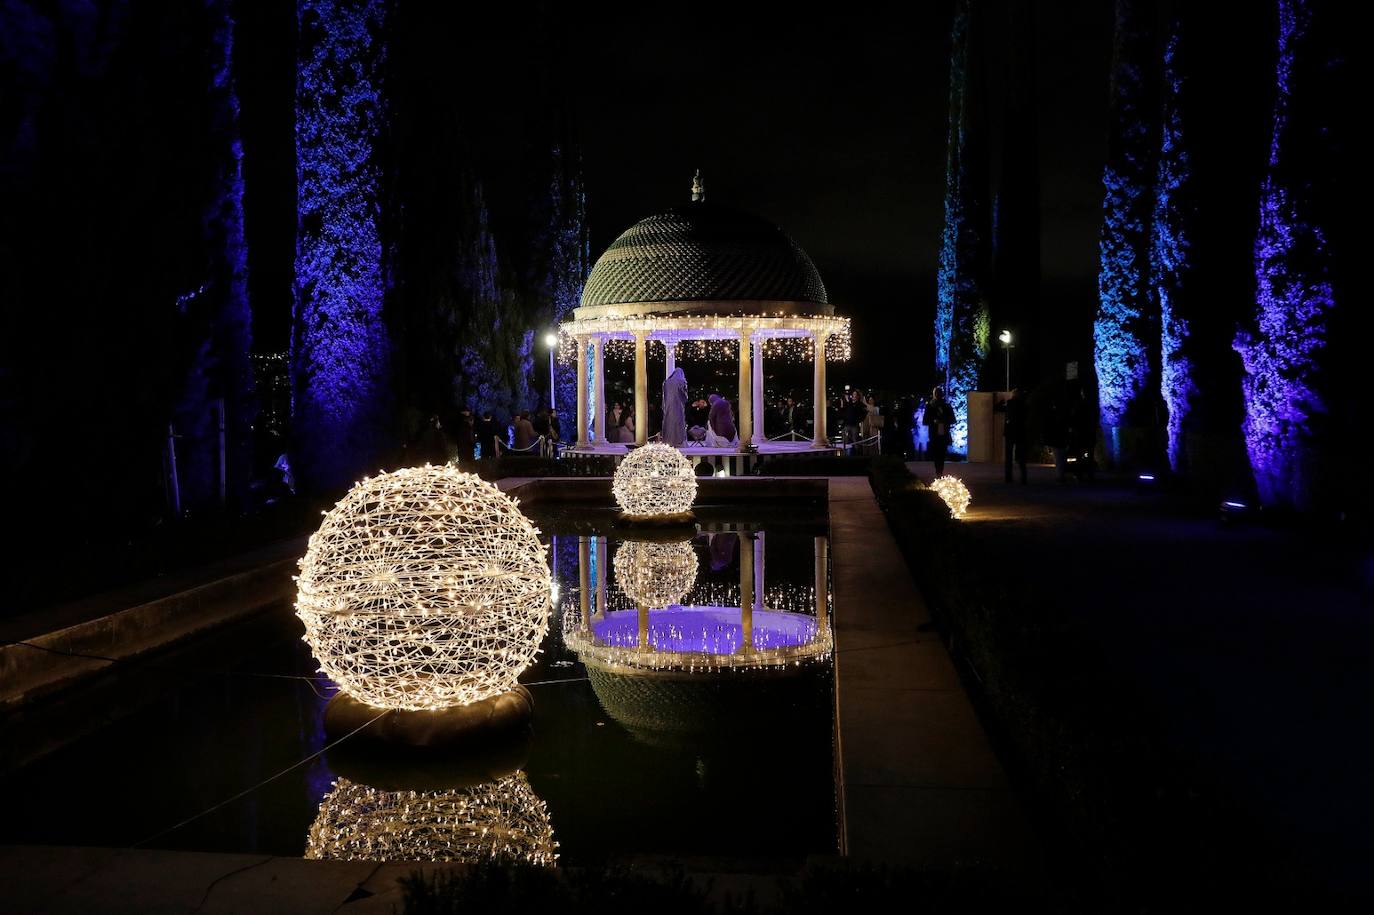 The Journey of the Star from the East, the new festive spectacular at Malaga's La Concepción botanical garden, can be visited until 8 January 2023. 